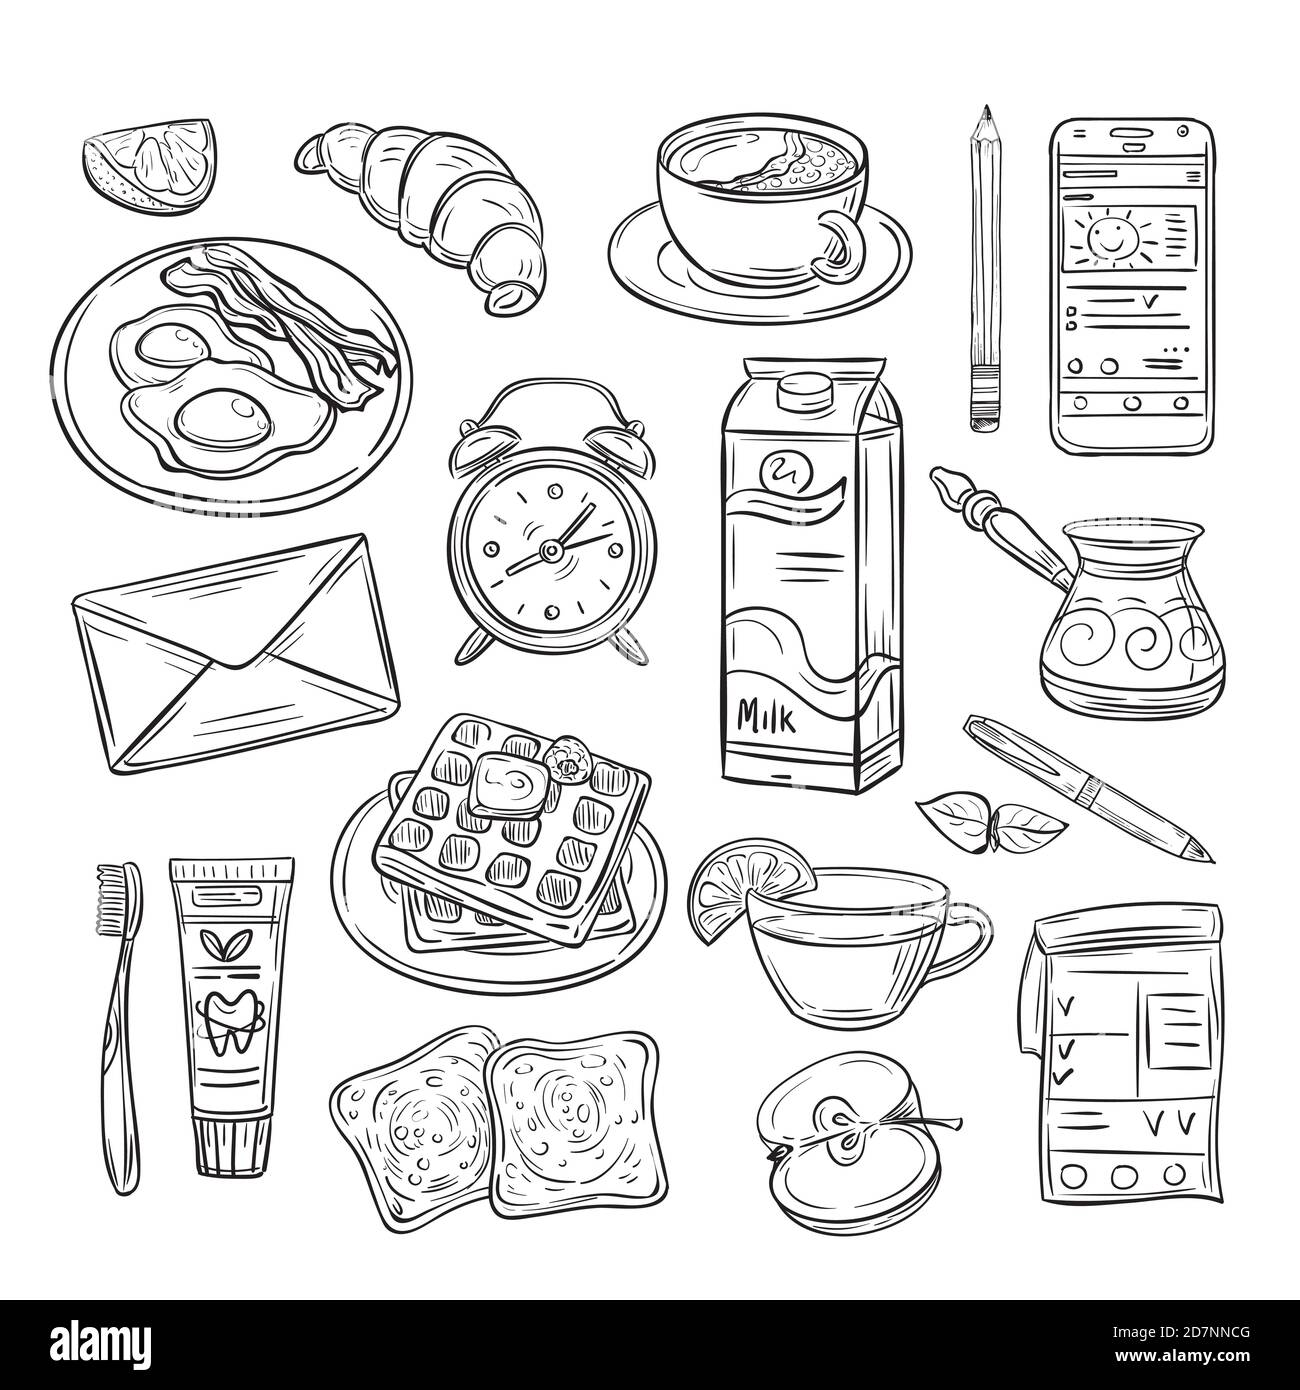 Good morning doodle. Healthy breakfast, happy mood of summer day. Sketch drawing vector set. Illustration of food for menu, coffee and breakfast Stock Vector